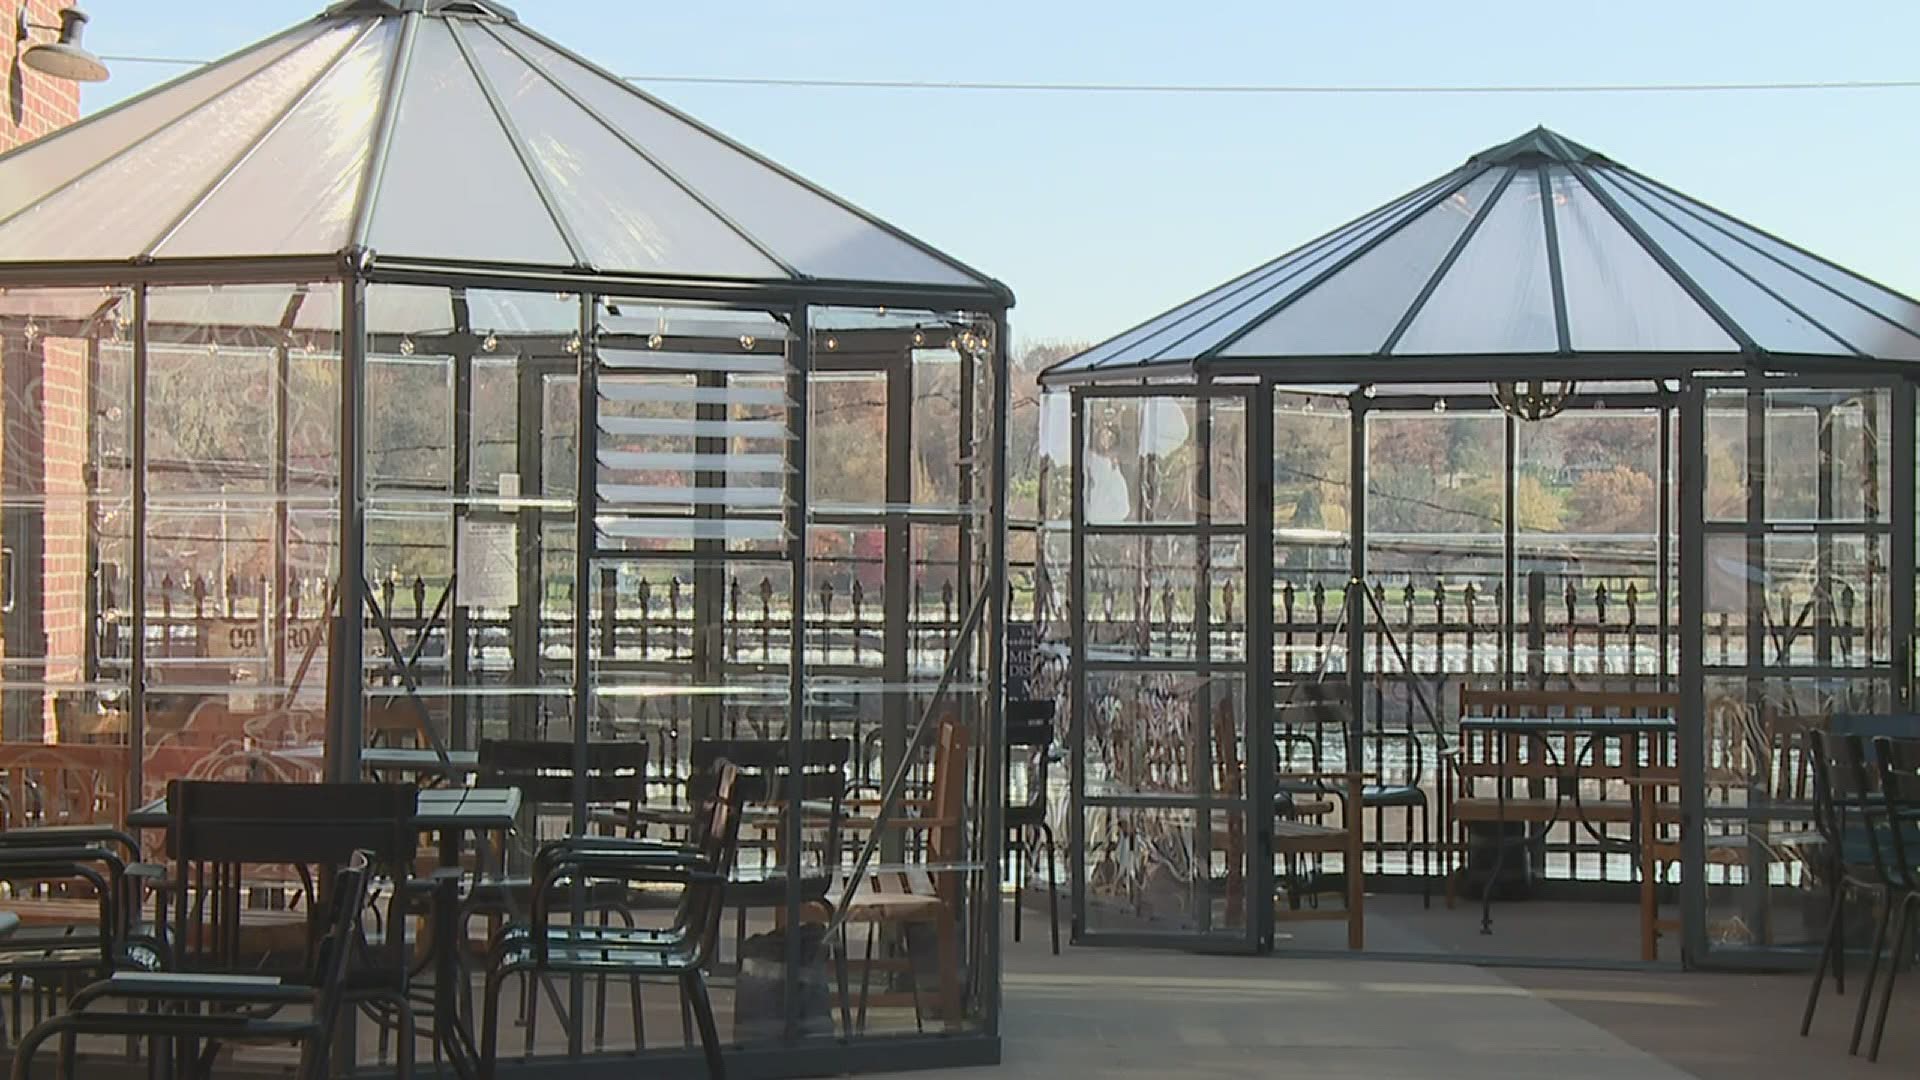 Both Great Revivalist Brew Lab and Mississippi River Distilling Company have converted small greenhouses into private dining areas.